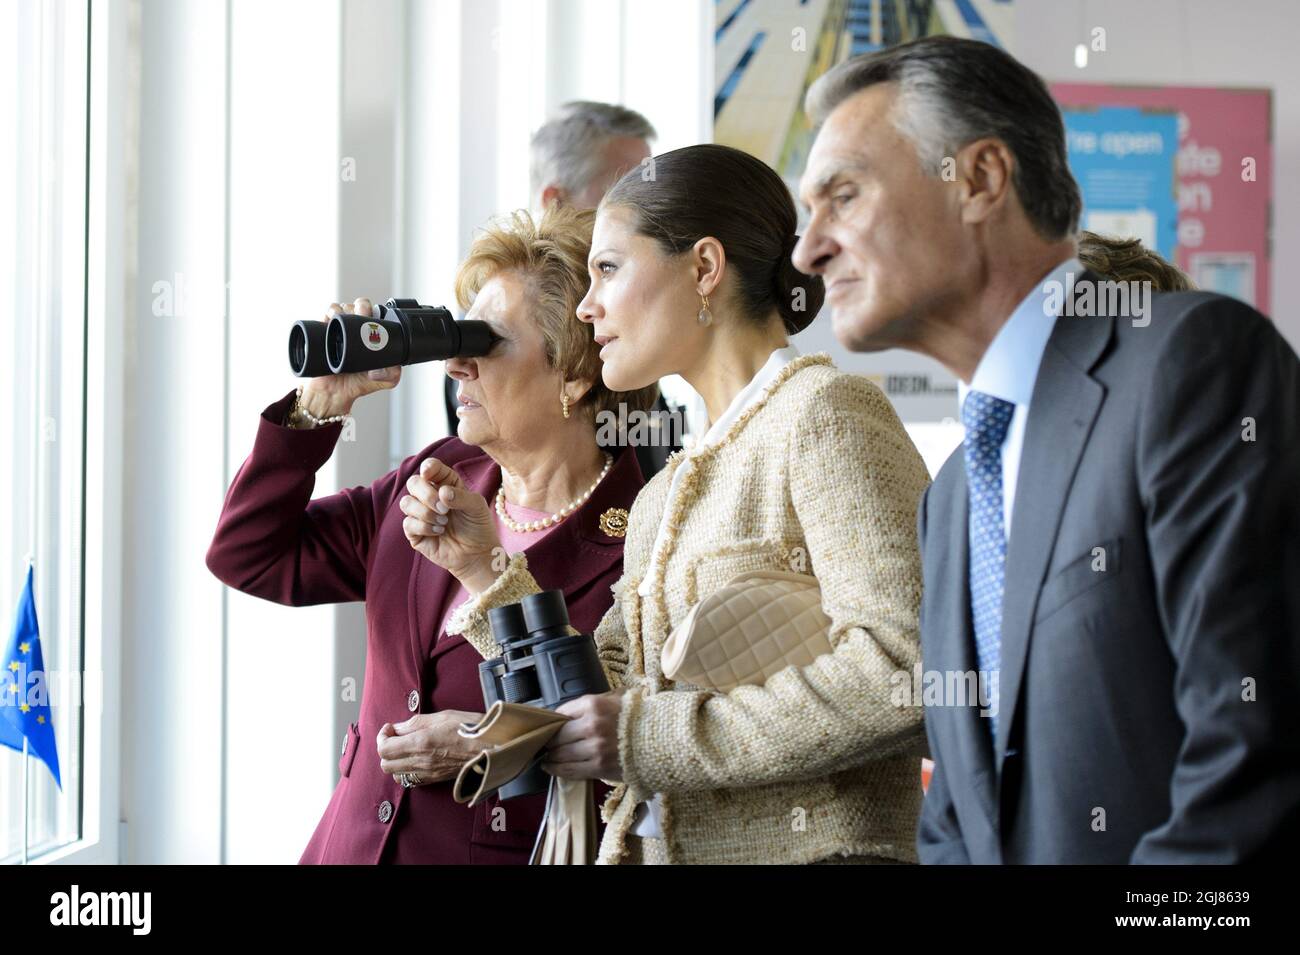 LUND 2013-10-03 Crown Princess Victoria seen poiting out landmarks fo Maria Cavaco Silva and President Anibal Cavaco Silva during a visit to Ideon Gateway in Lund, Sweden, October 3, 2013. The Crown Princess couple accompanied President Anibal Cavaco Silva and his wife Maria. The Ideon Gateway is a model for building a city part designed for research and innovation. The President of Portugal is on a State visit to Sweden. Foto: Ludvig Thunman / TT / Kod 10600  Stock Photo